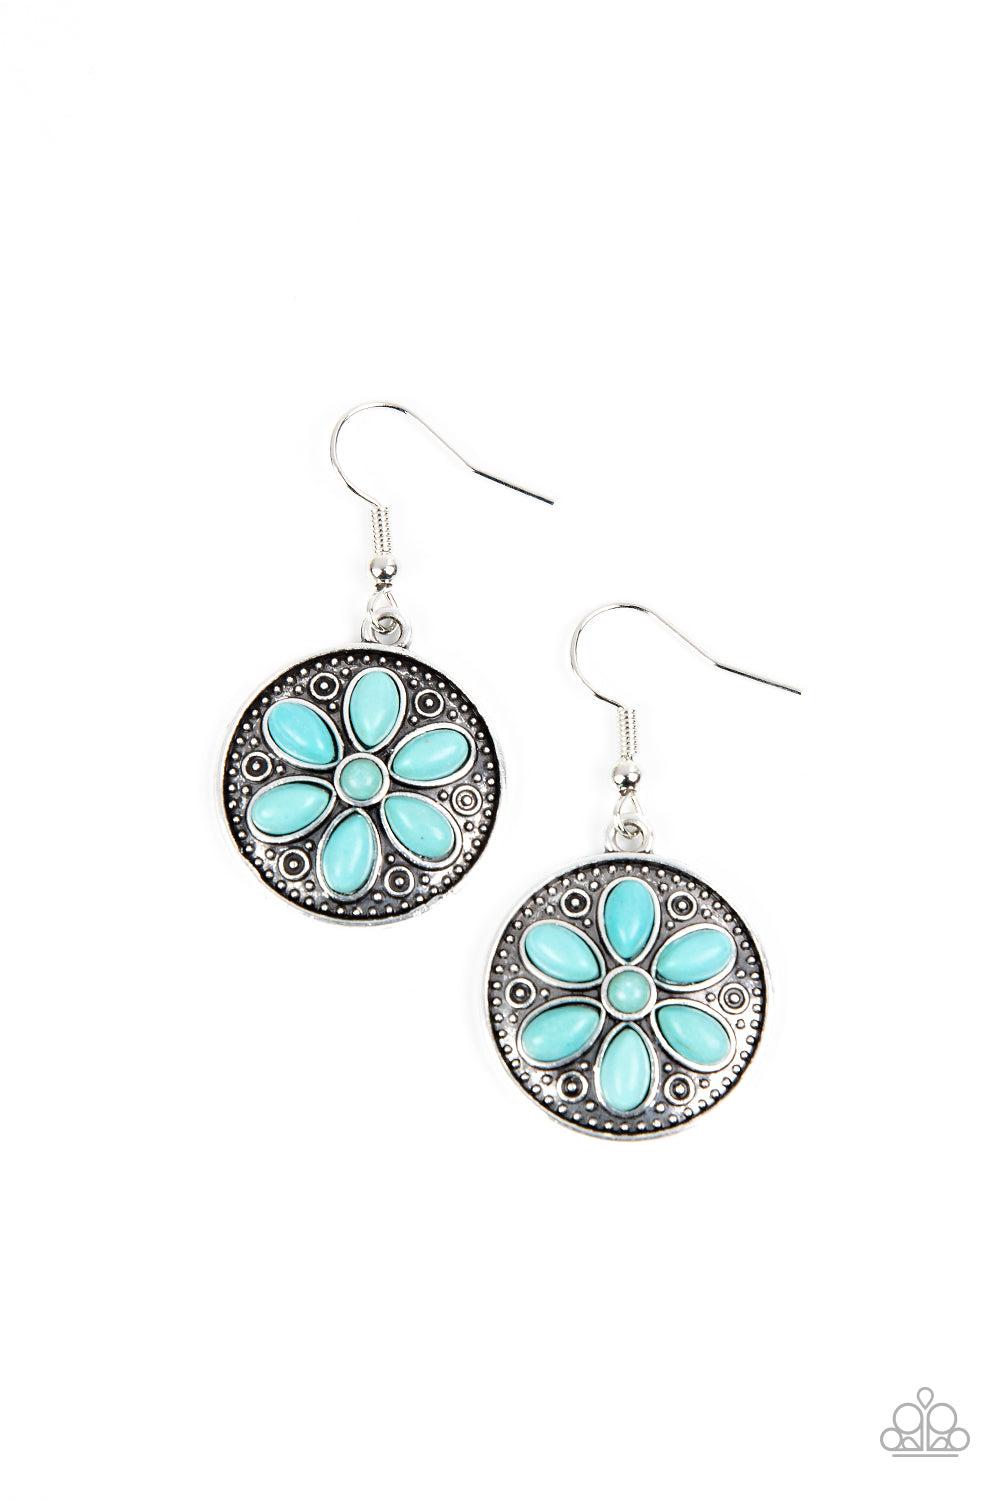 Saguaro Spring Turquoise Blue Stone Flower Earrings - Paparazzi Accessories- lightbox - CarasShop.com - $5 Jewelry by Cara Jewels